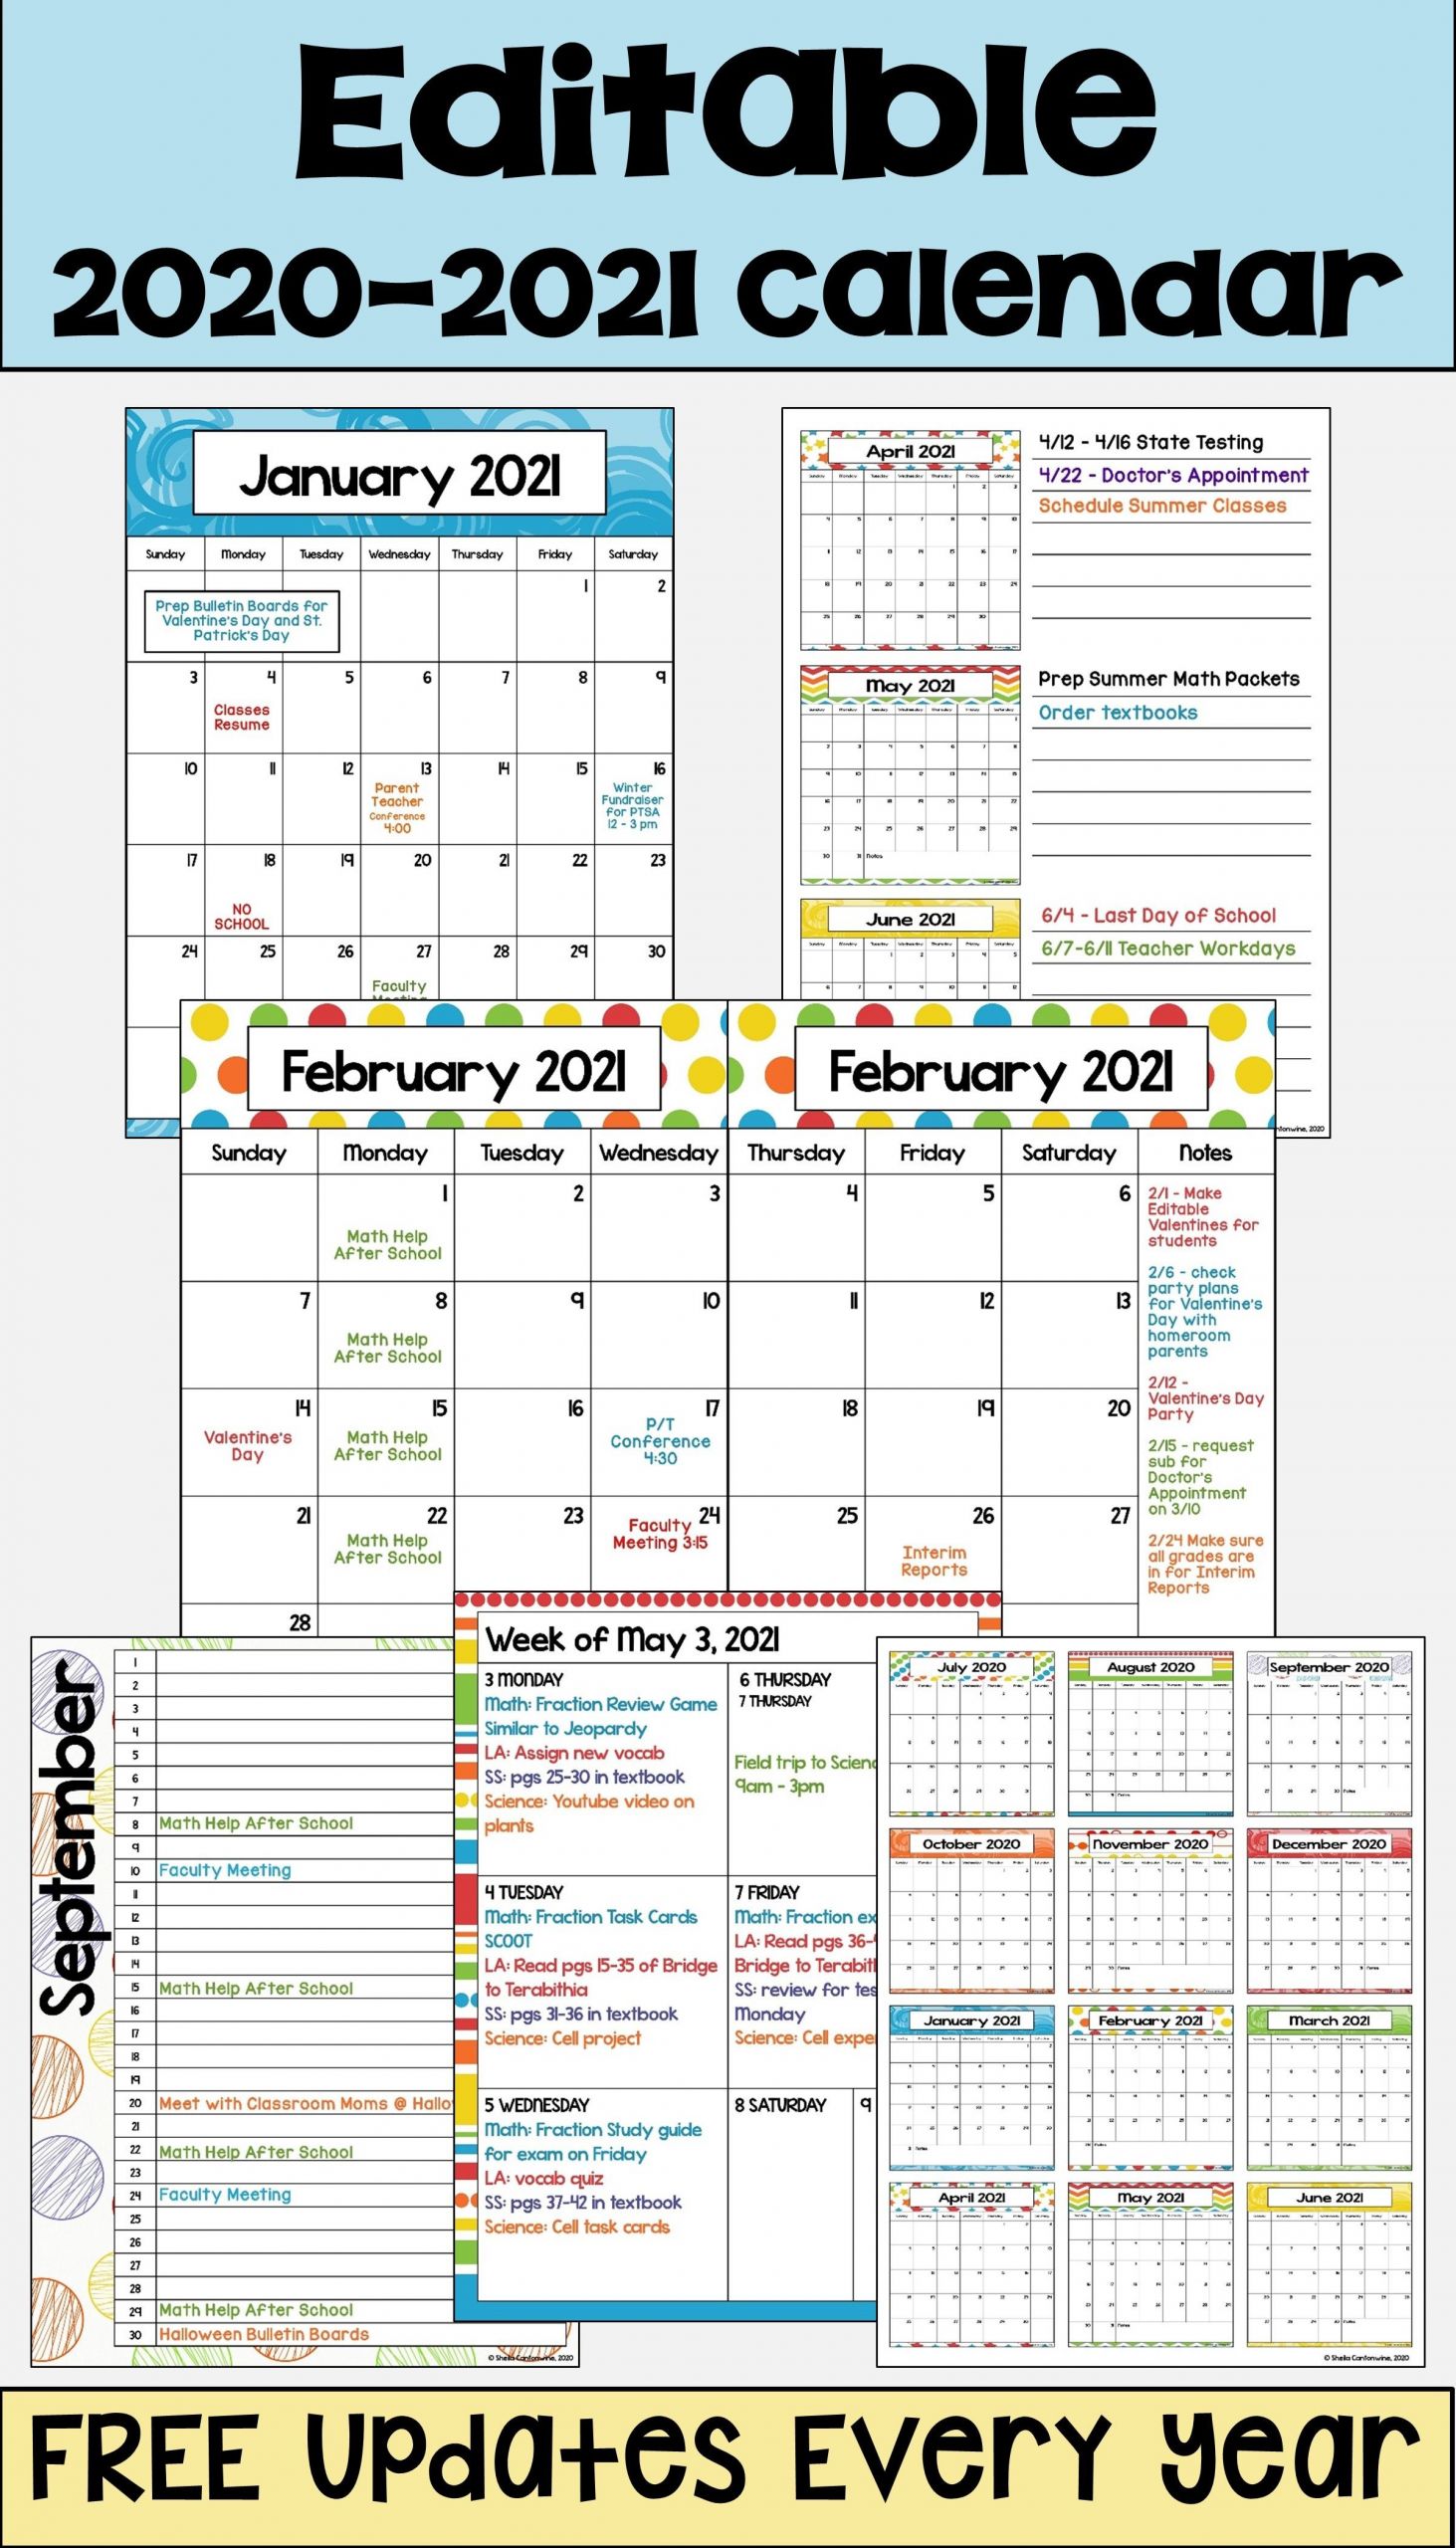 Editable 2020 2021 Calendar with 6 Layouts and Free Updates